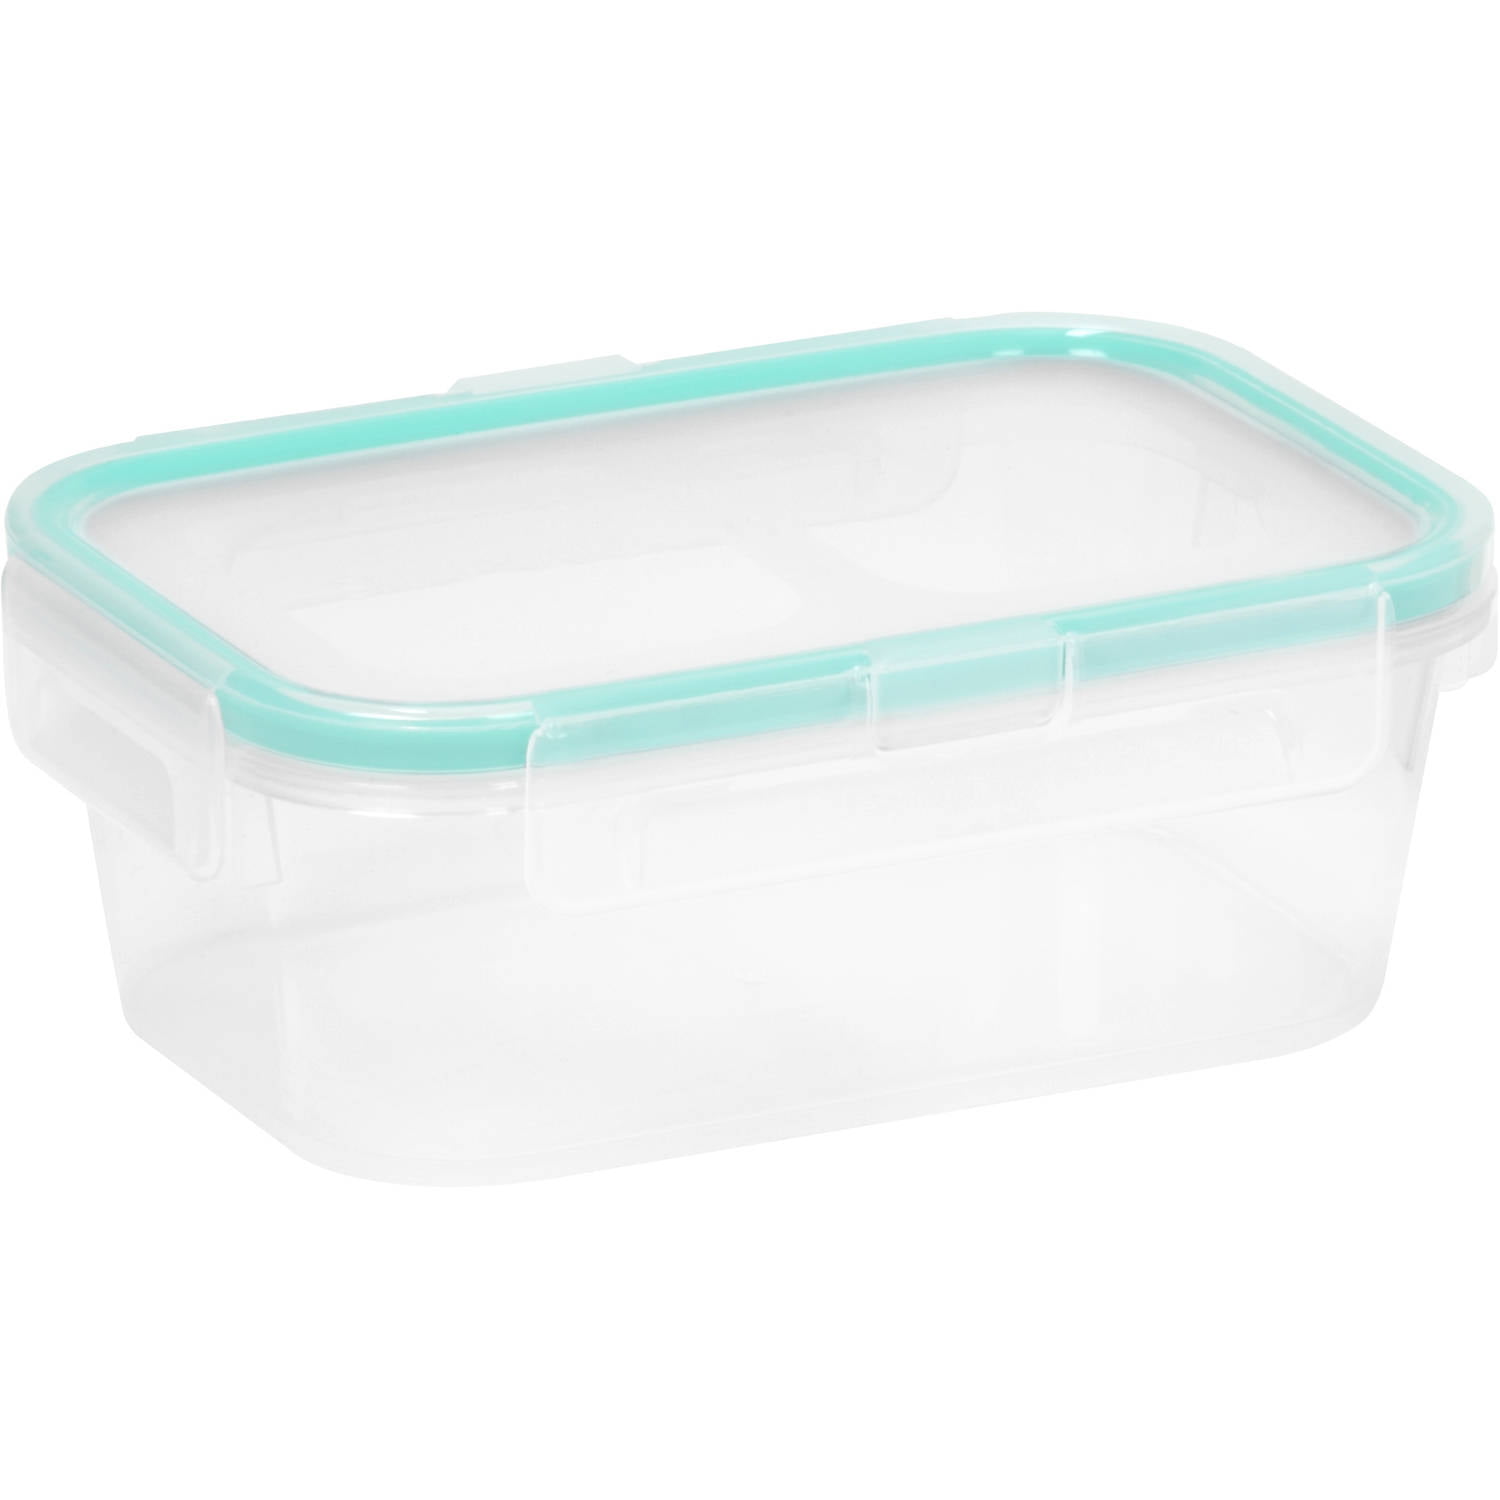 Snapware Plastic Small Round Containers - 2 Pack - Transparent, 1.2 c -  Ralphs